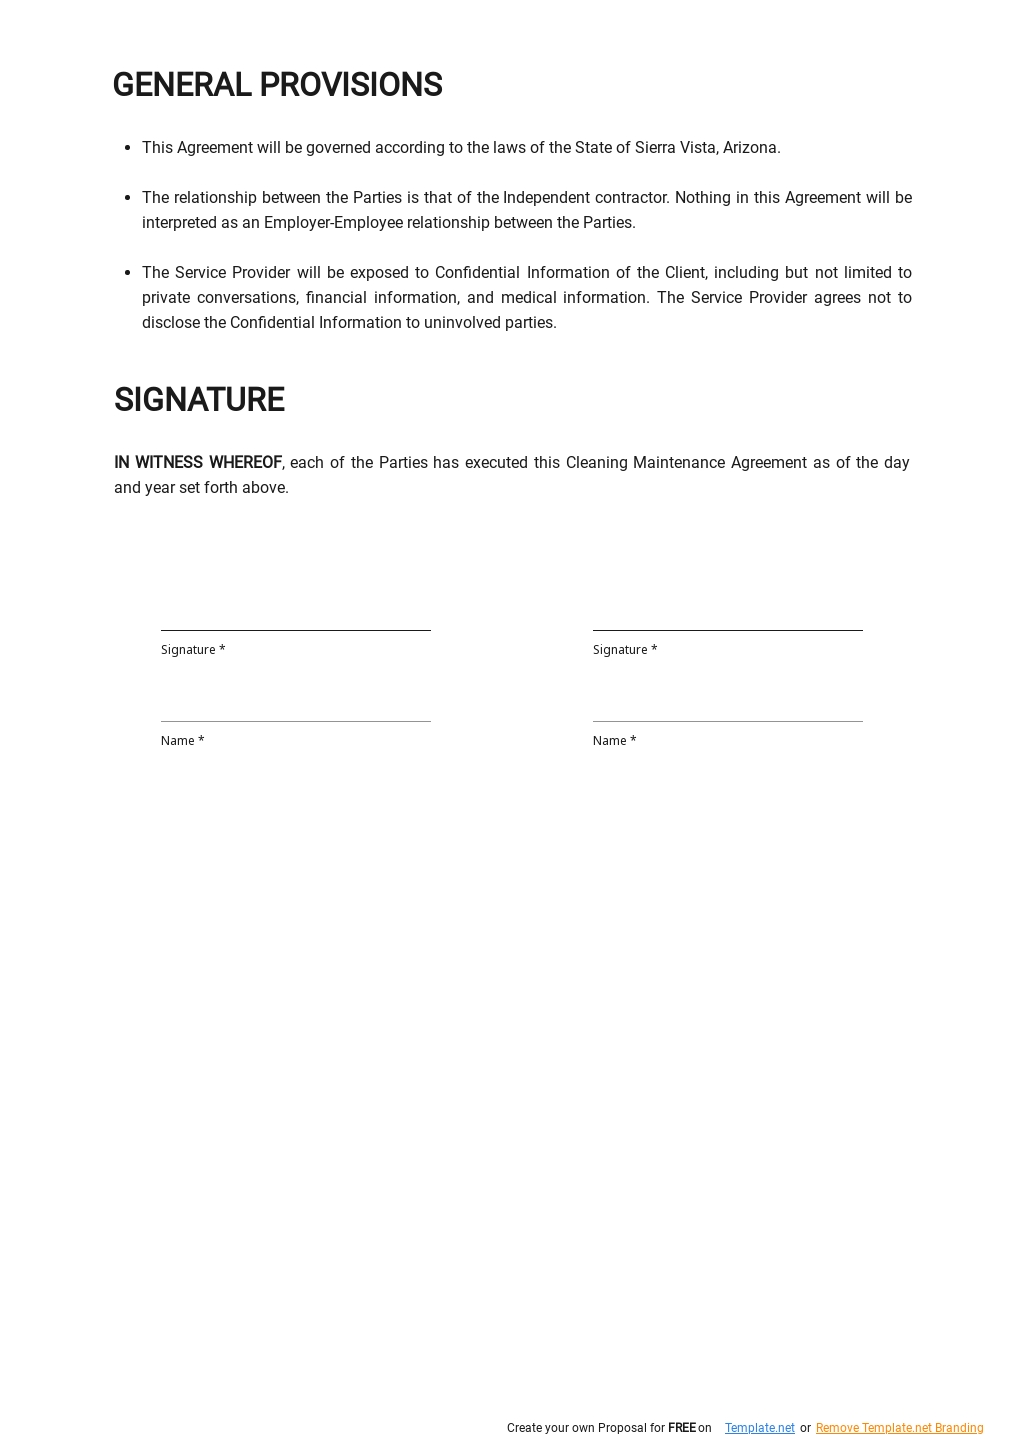 Cleaning Maintenance Agreement Template 2.jpe